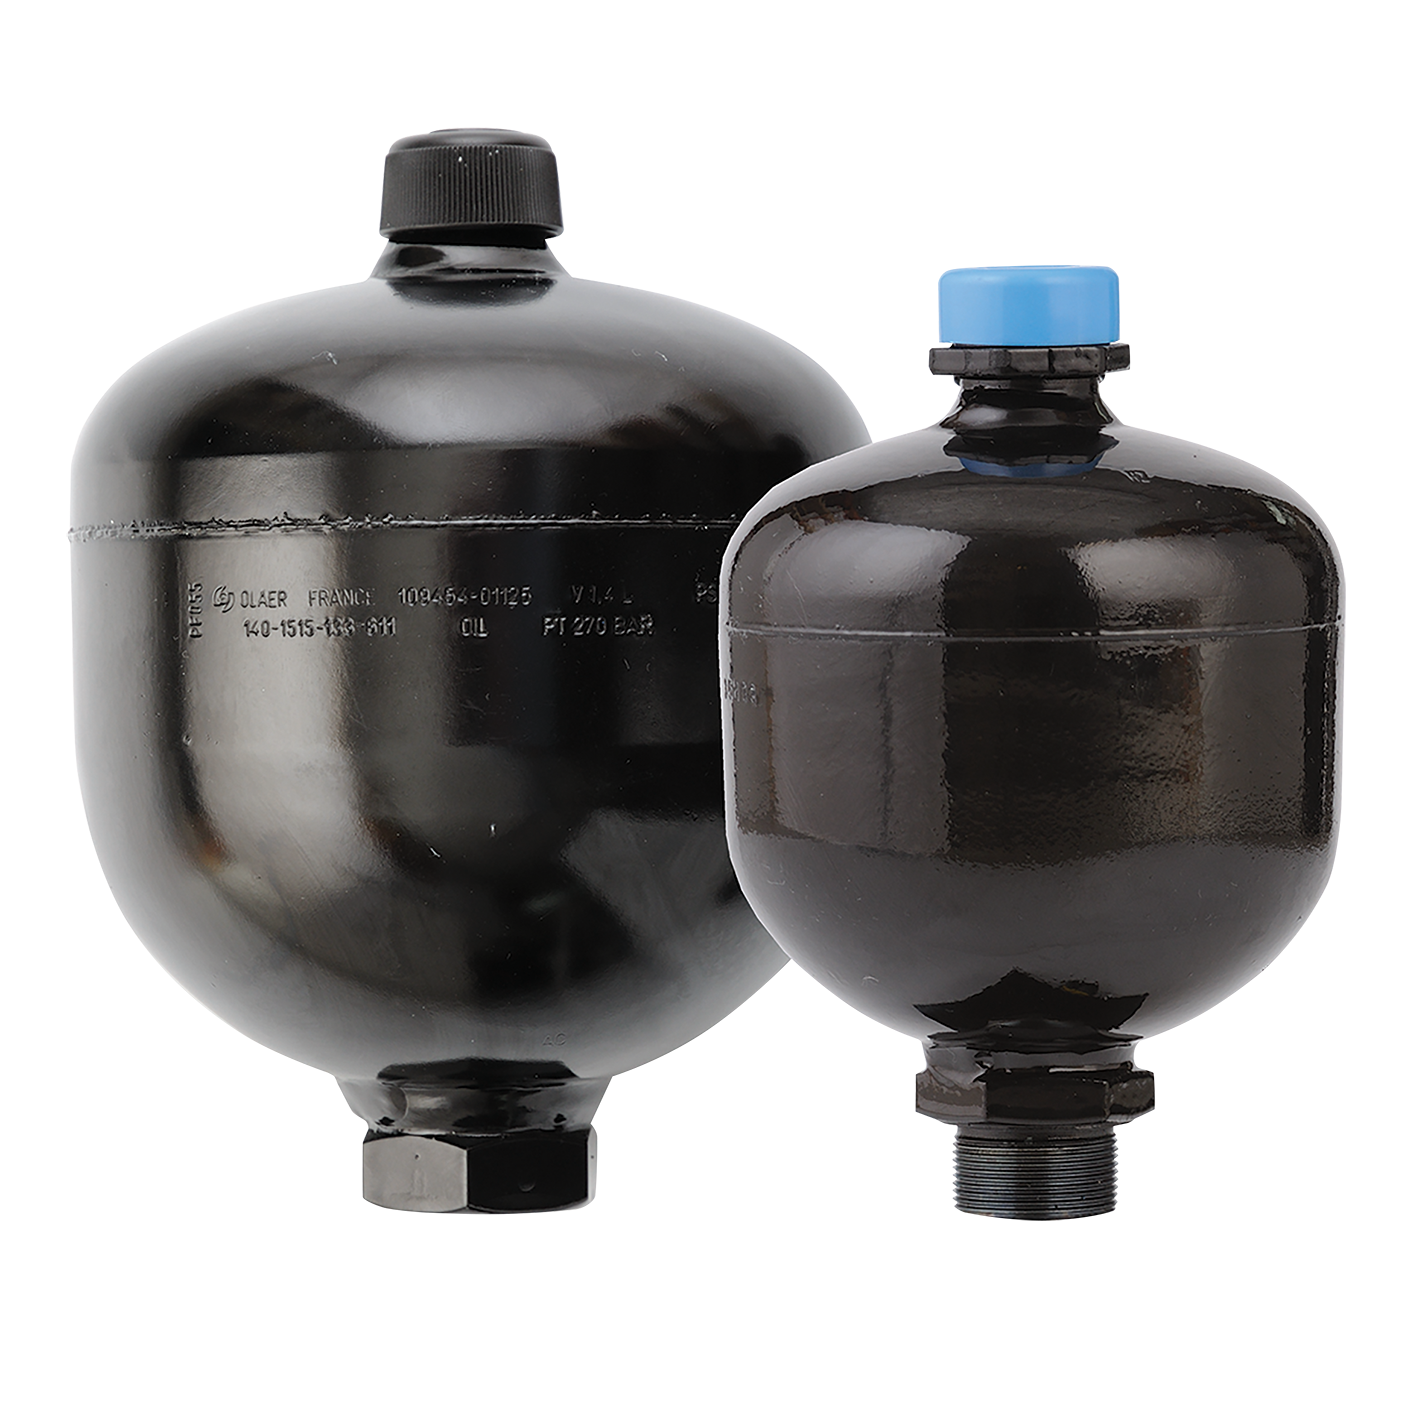 UK's Leading Suppliers of FCH DIAPHRAGM ACCUM 2.0 LITRES G3/4